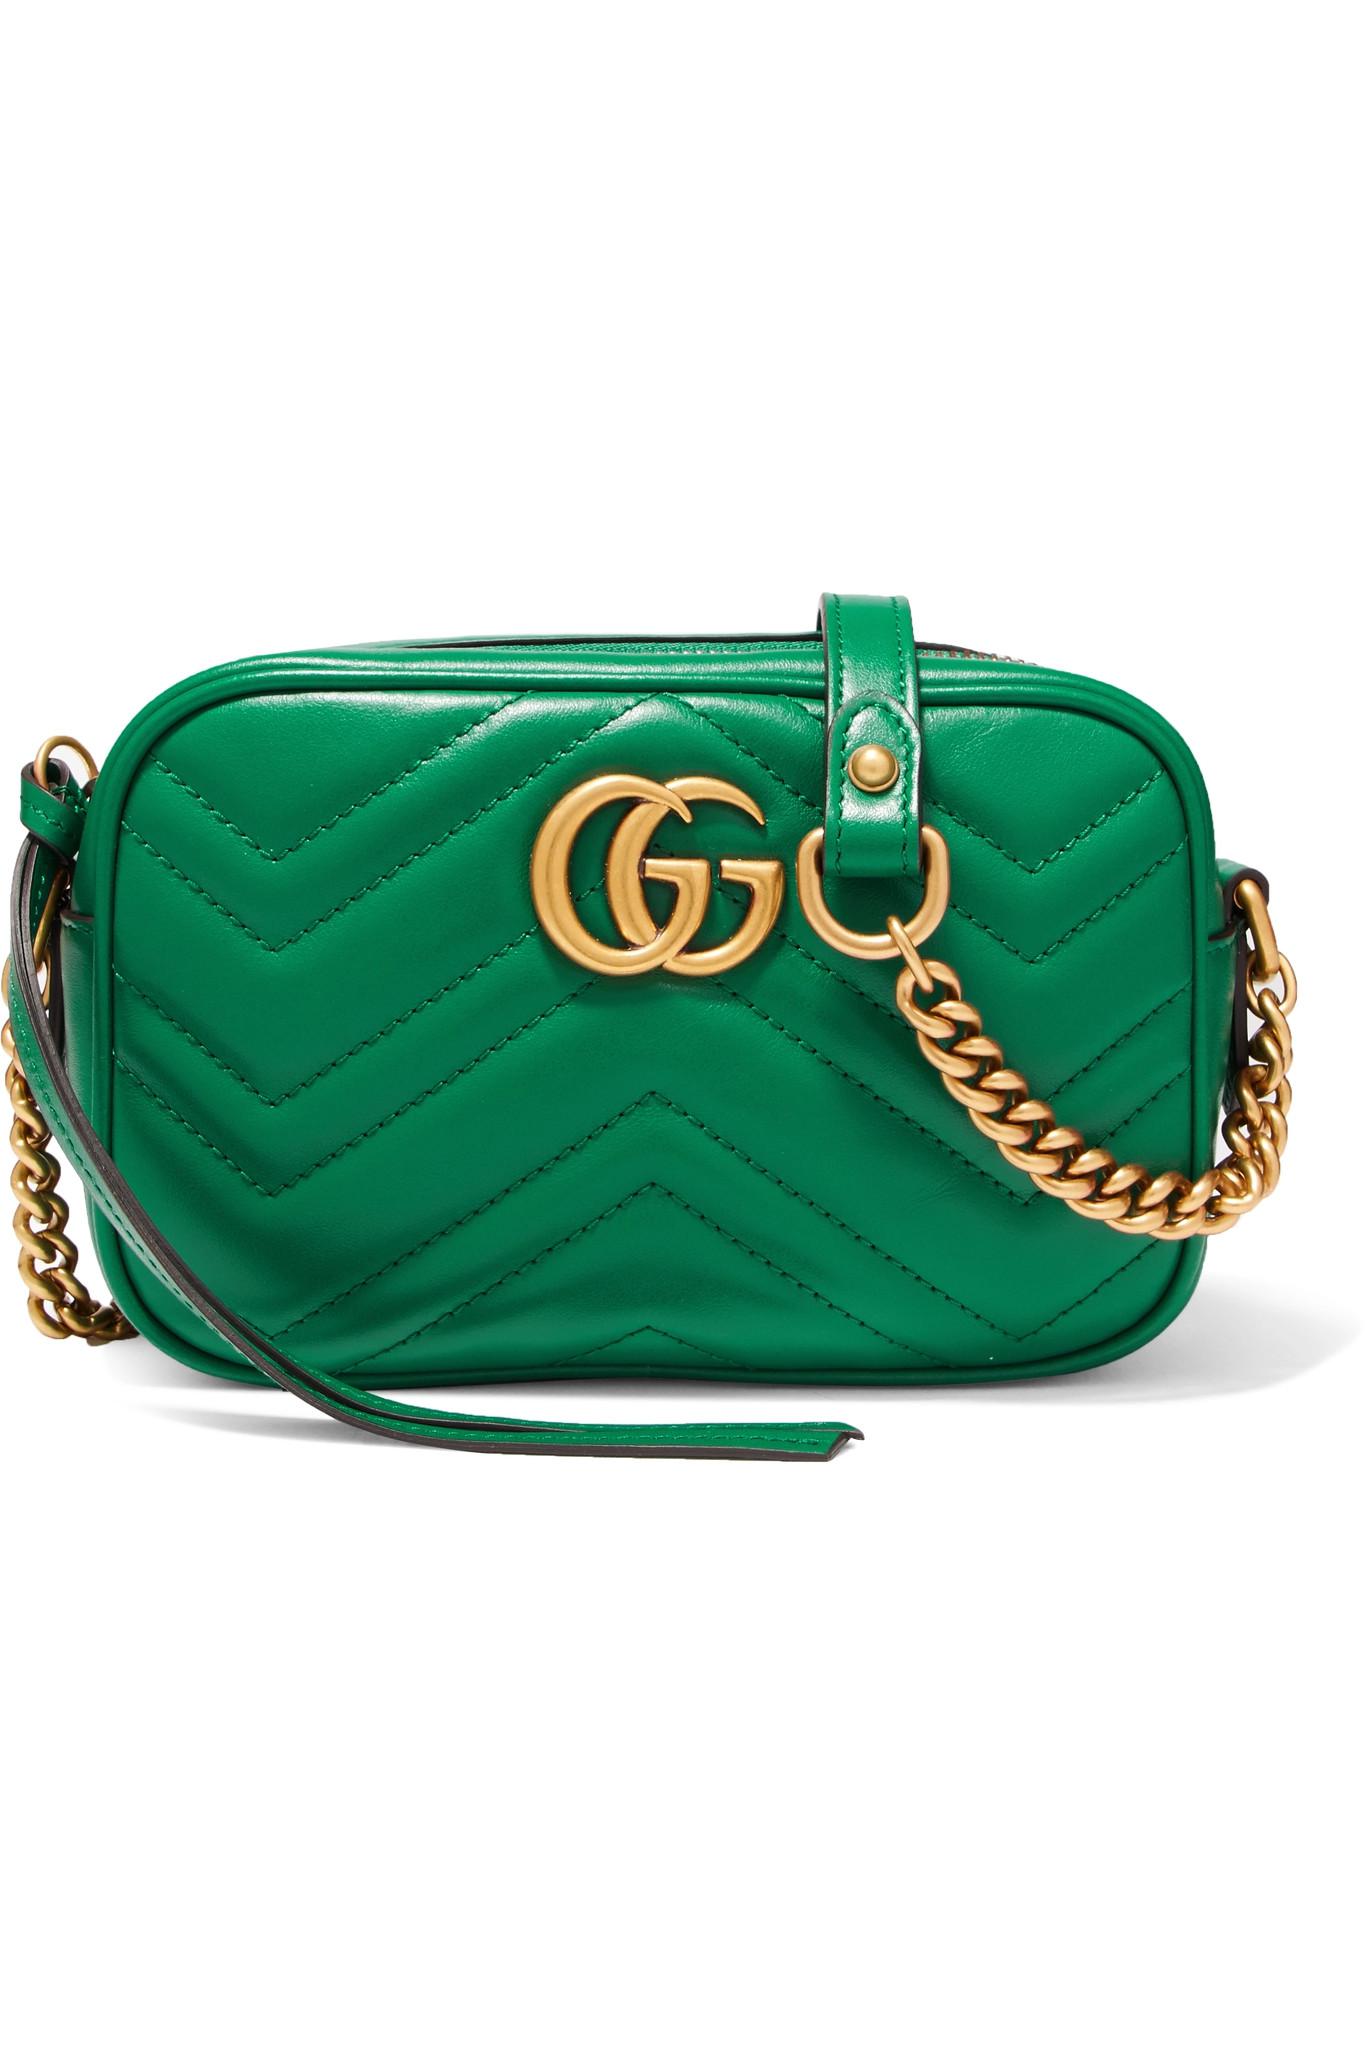 Gucci Gg Marmont Camera Mini Quilted Leather Shoulder Bag in Green | Lyst